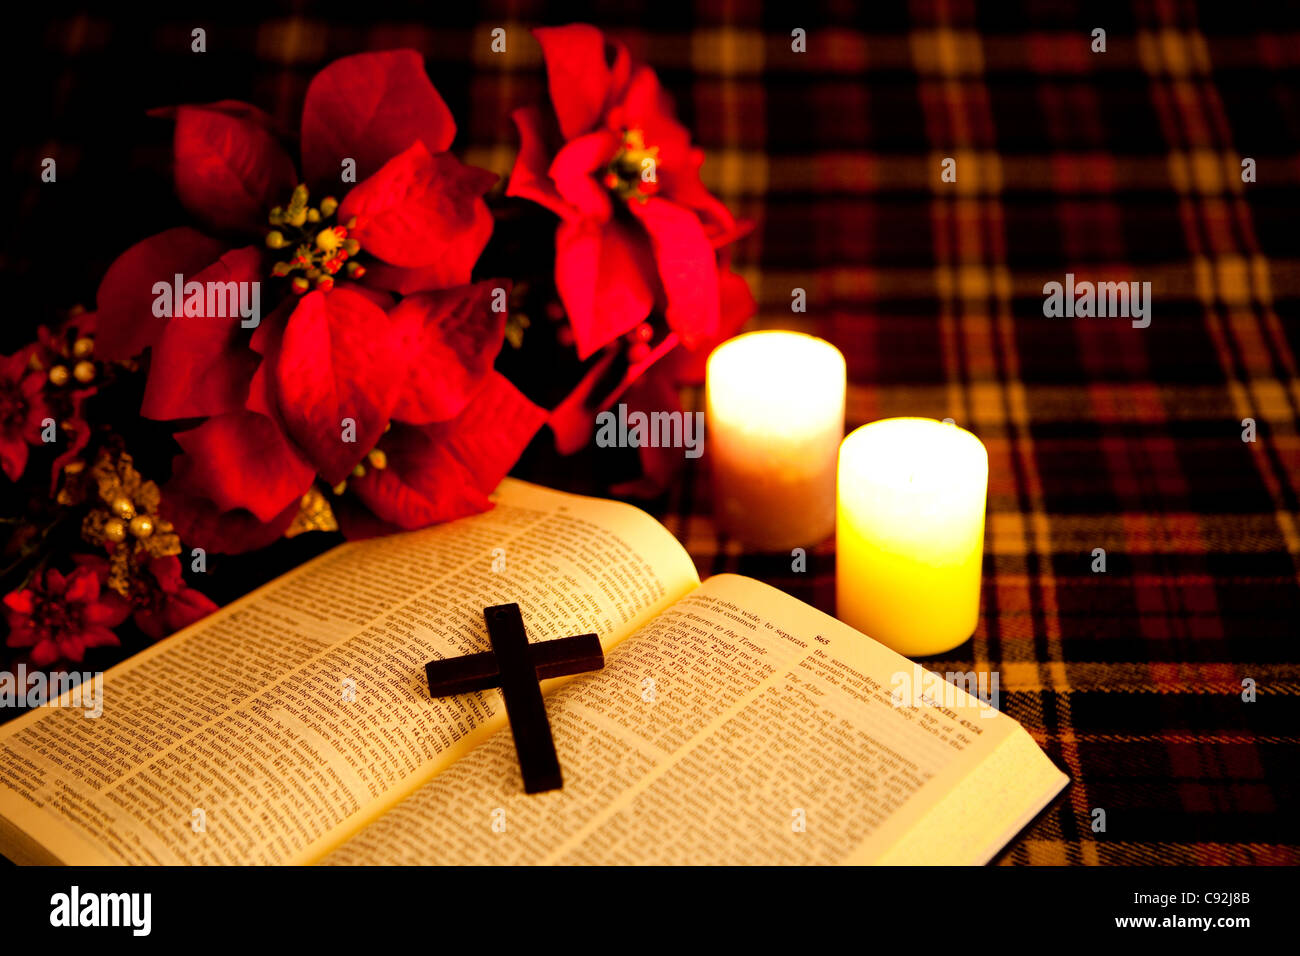 A crucifix on an open bible with illuminated candle and flowers Stock Photo